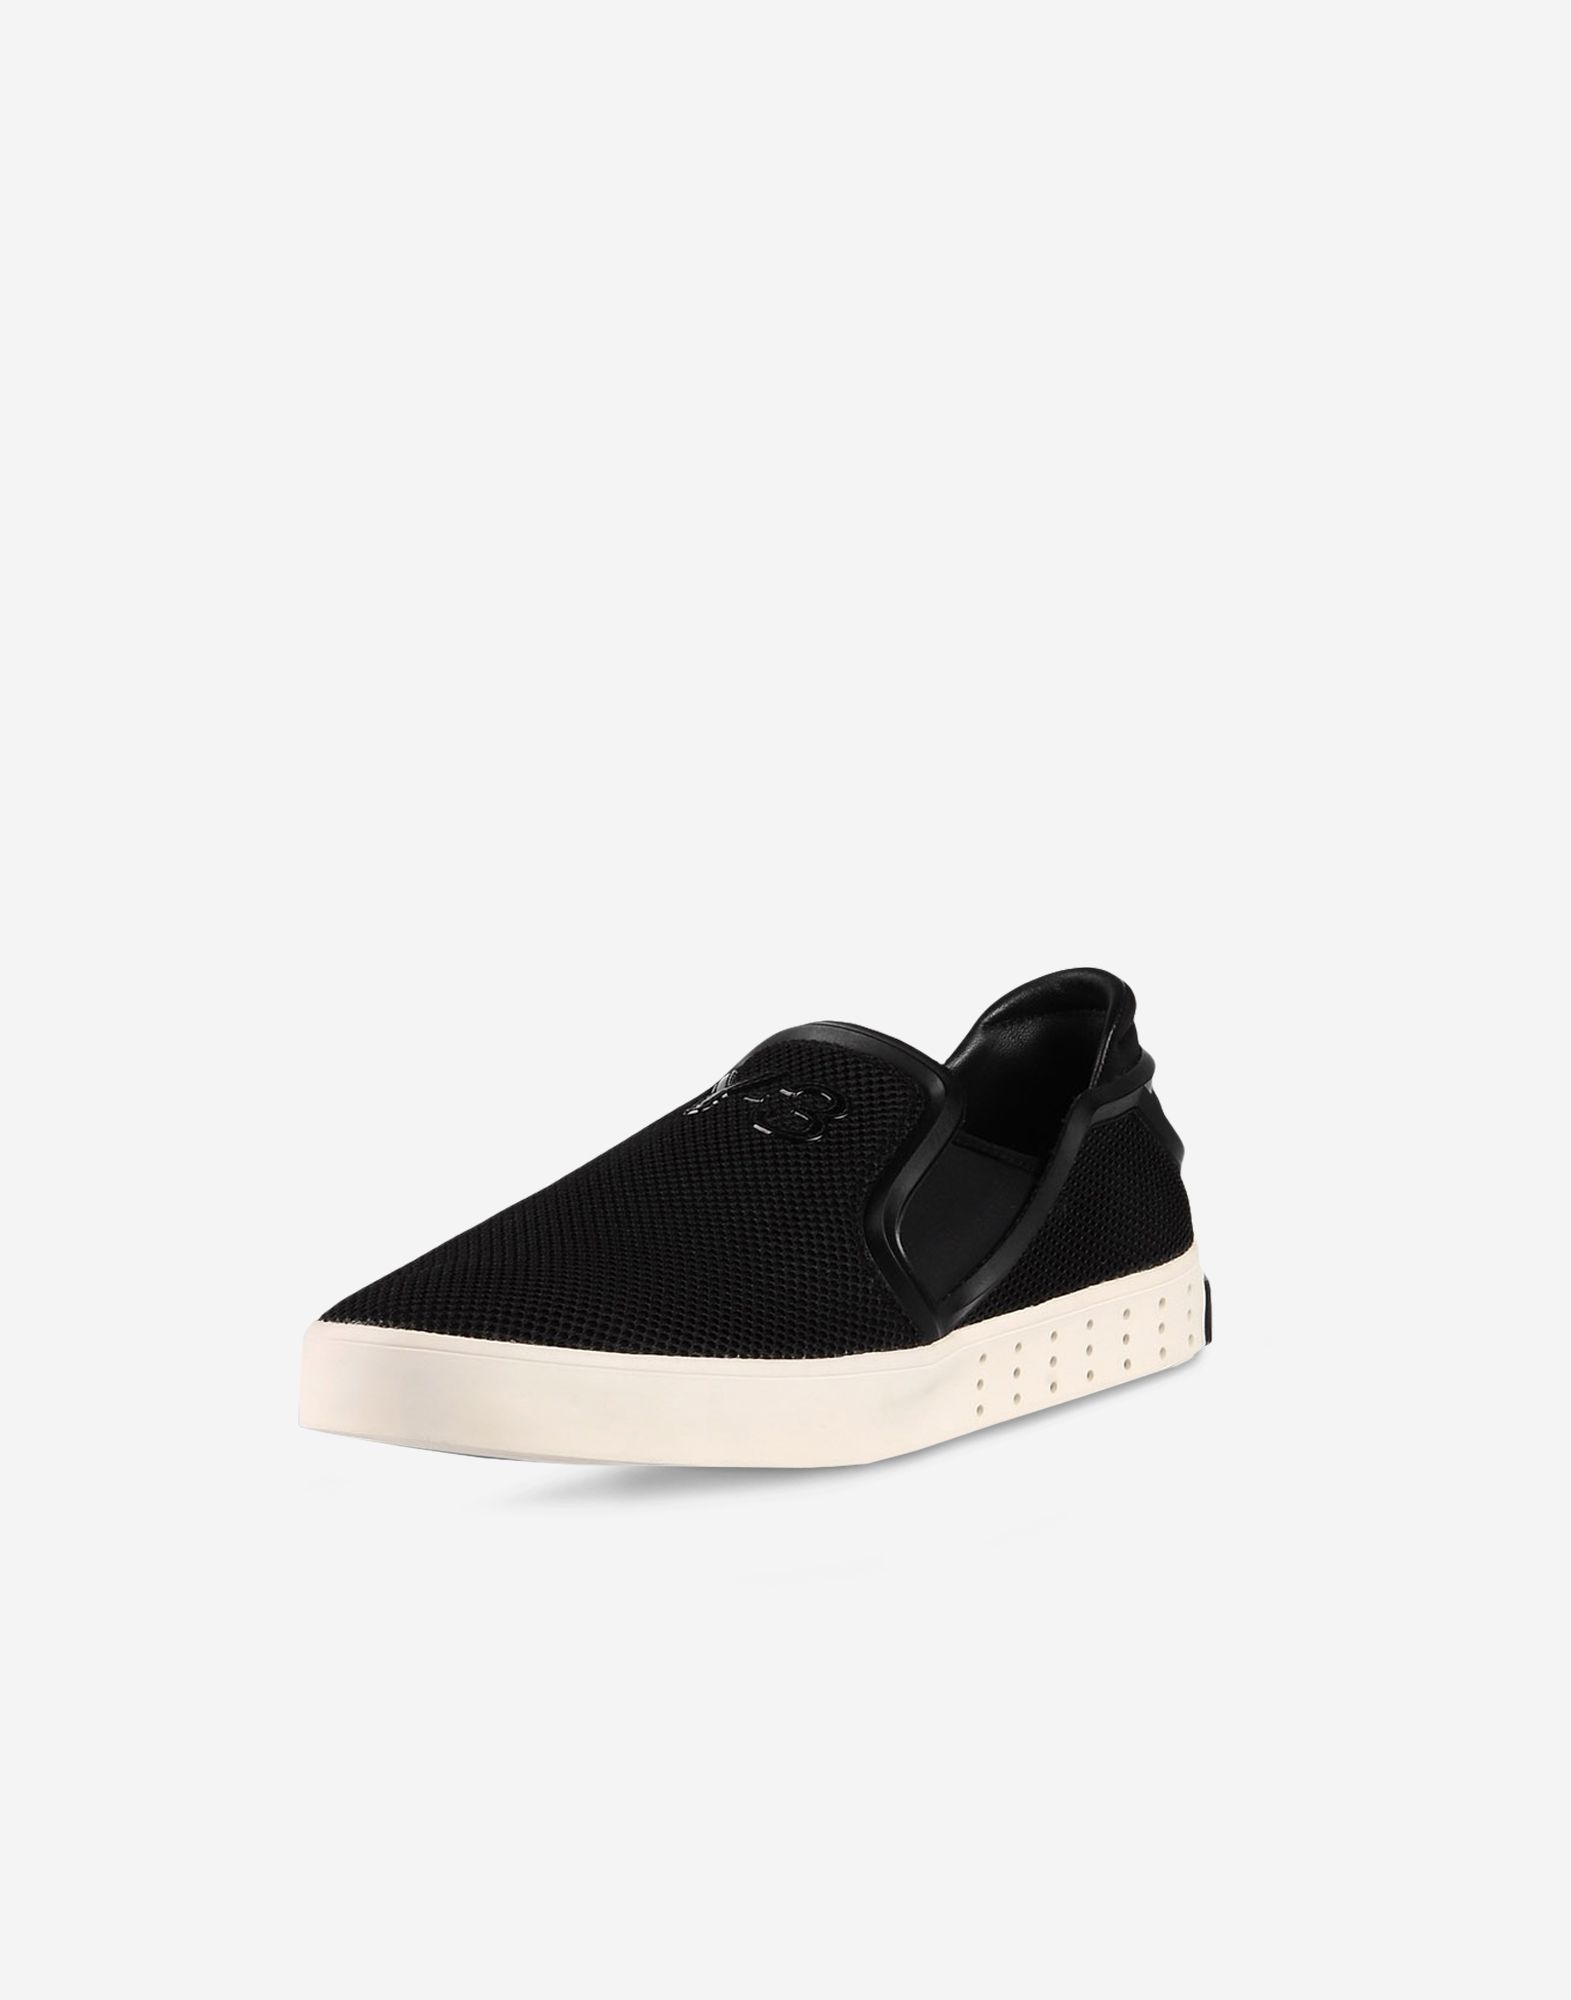 Y 3 Laver Slip On for Men | Adidas Y-3 Official Store